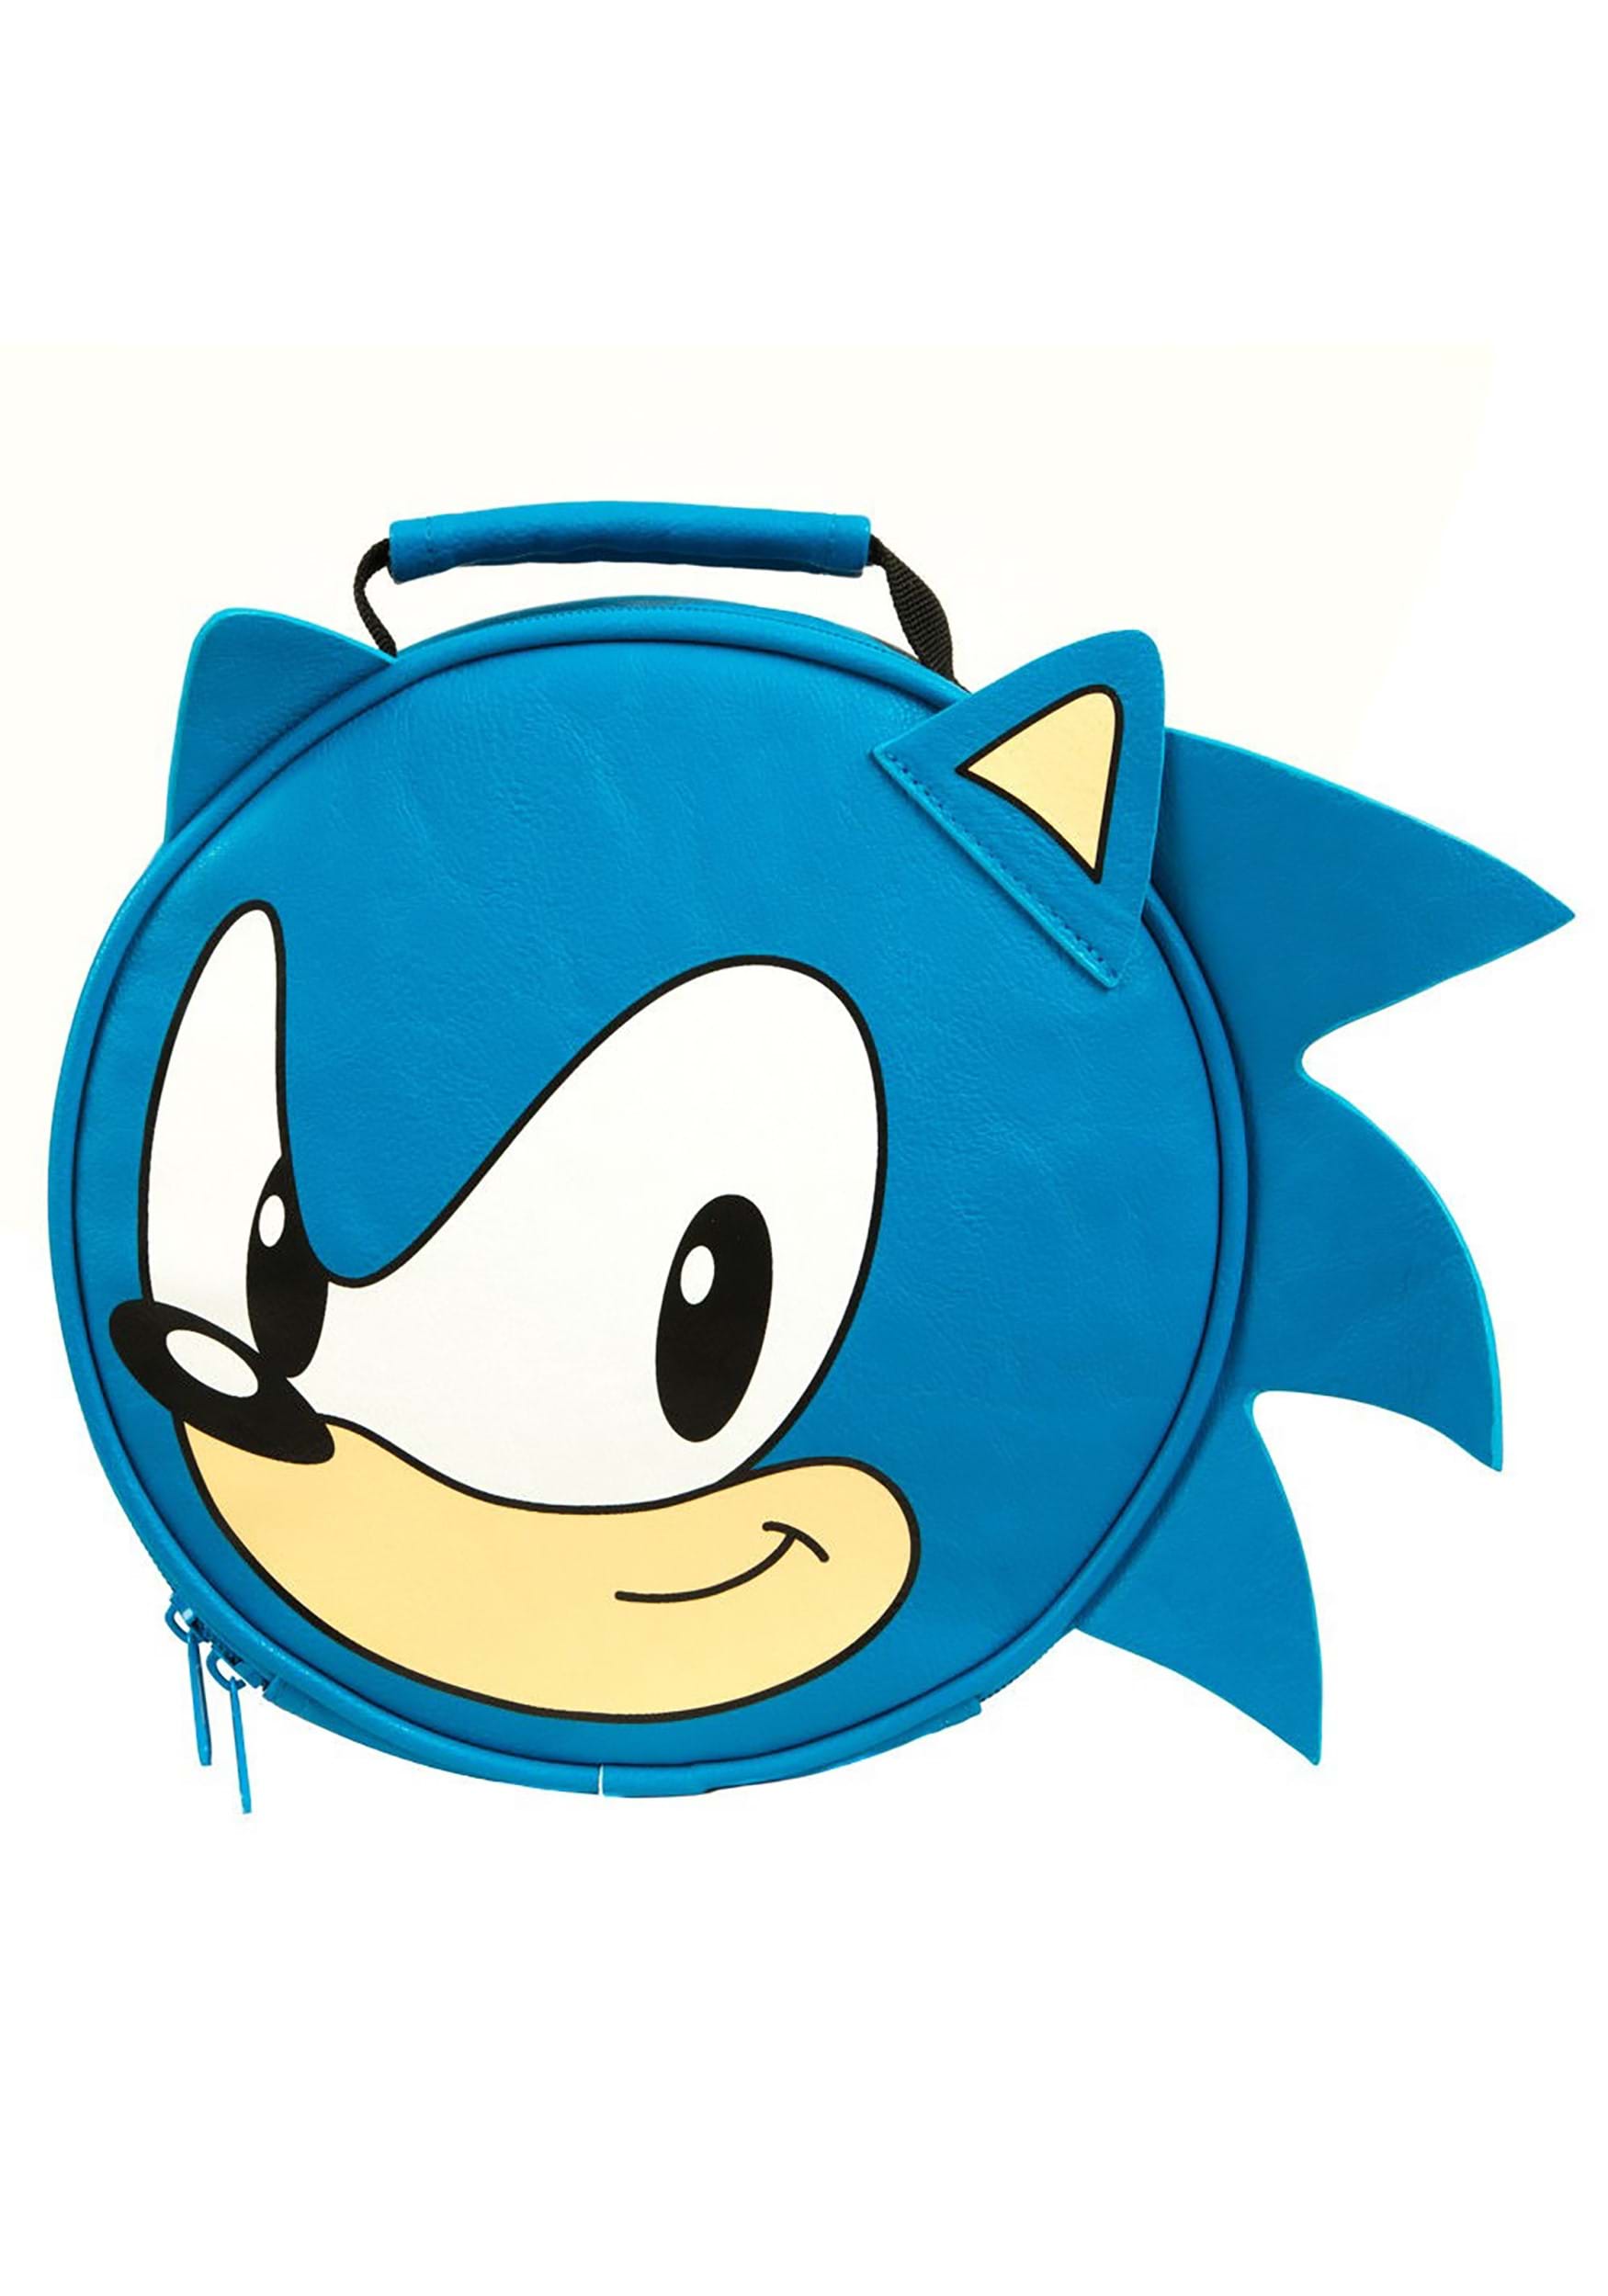 Sonic the Hedgehog 2 Fast 2 Cool Dual Compartment Insulated Lunch Box Blue